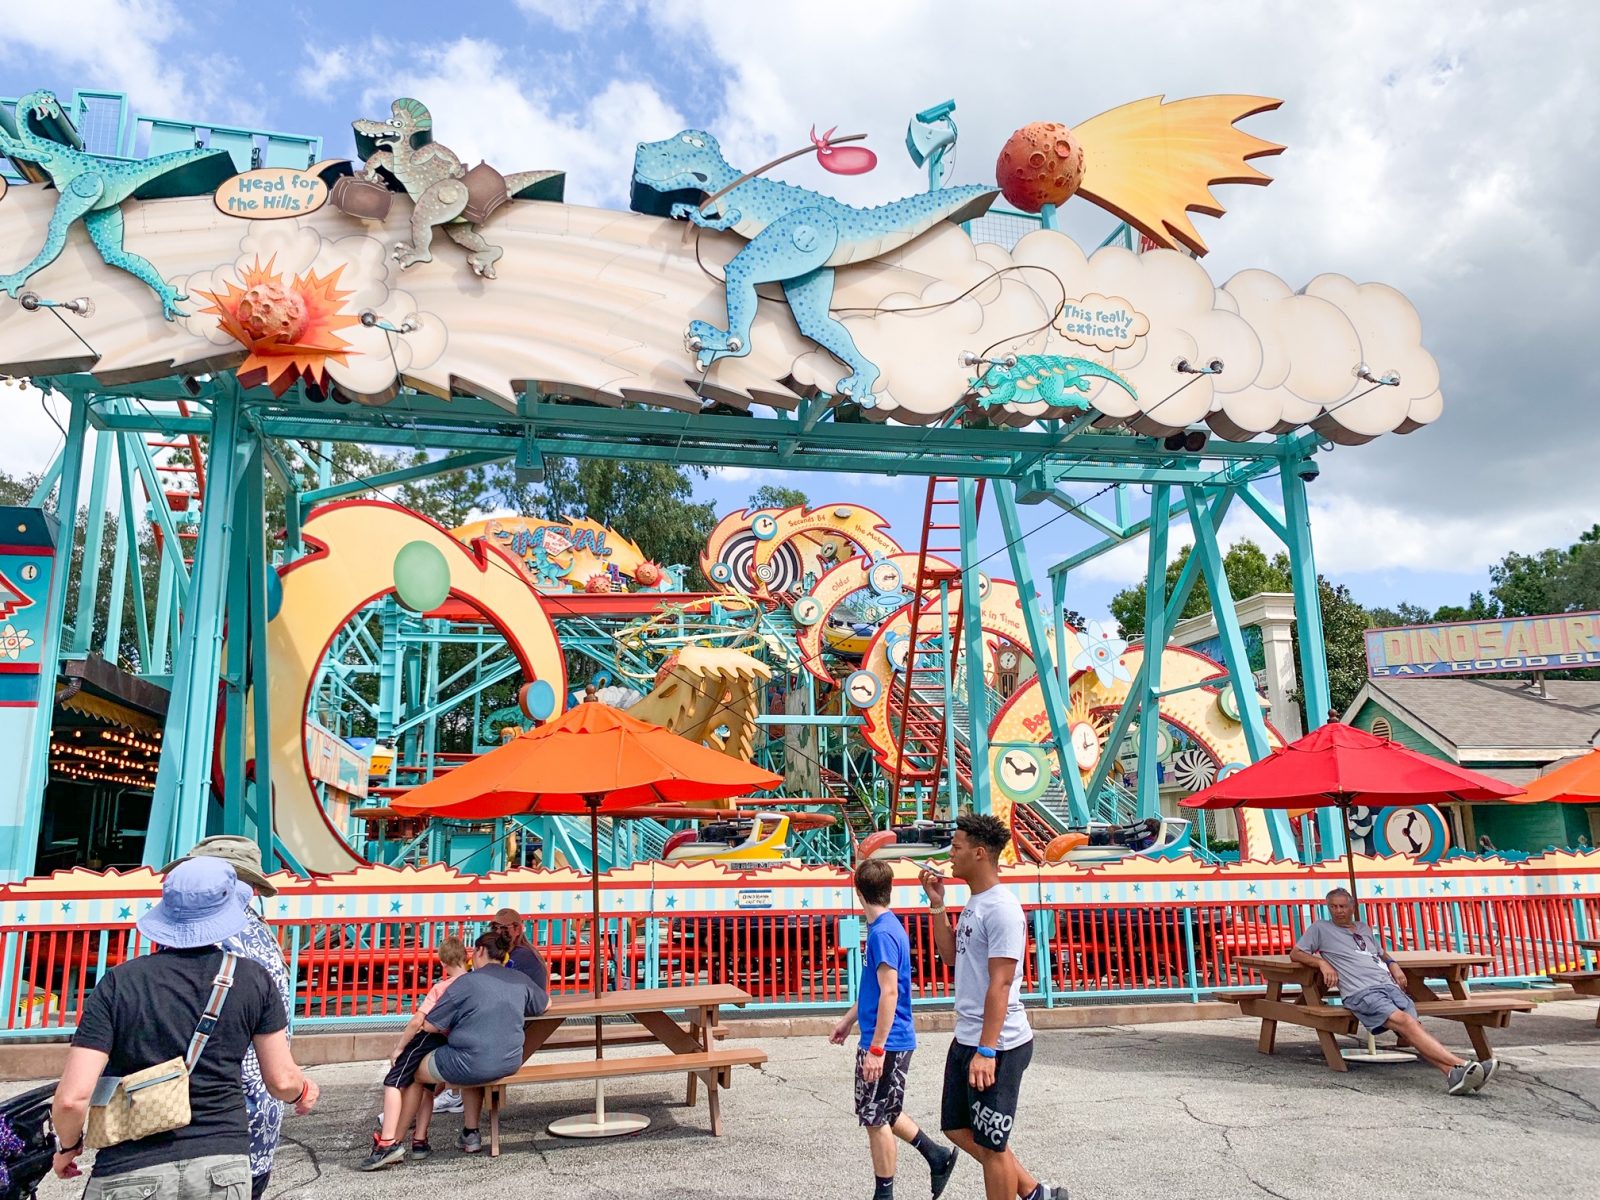 view of the entire Primeval Whirl coaster ride located in Dinoland